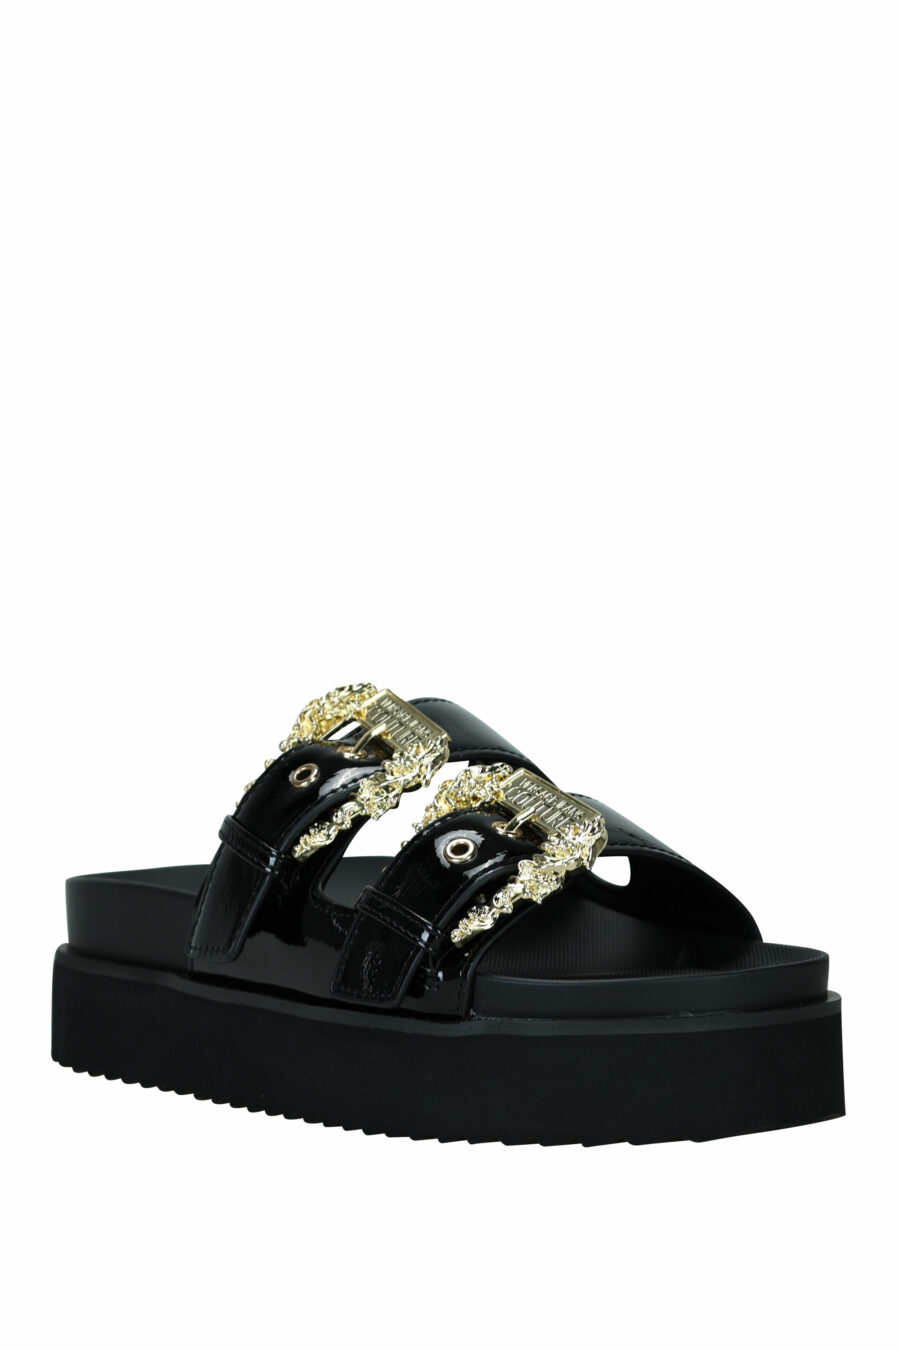 Black sandals with gold baroque double buckle - 8052019607253 1